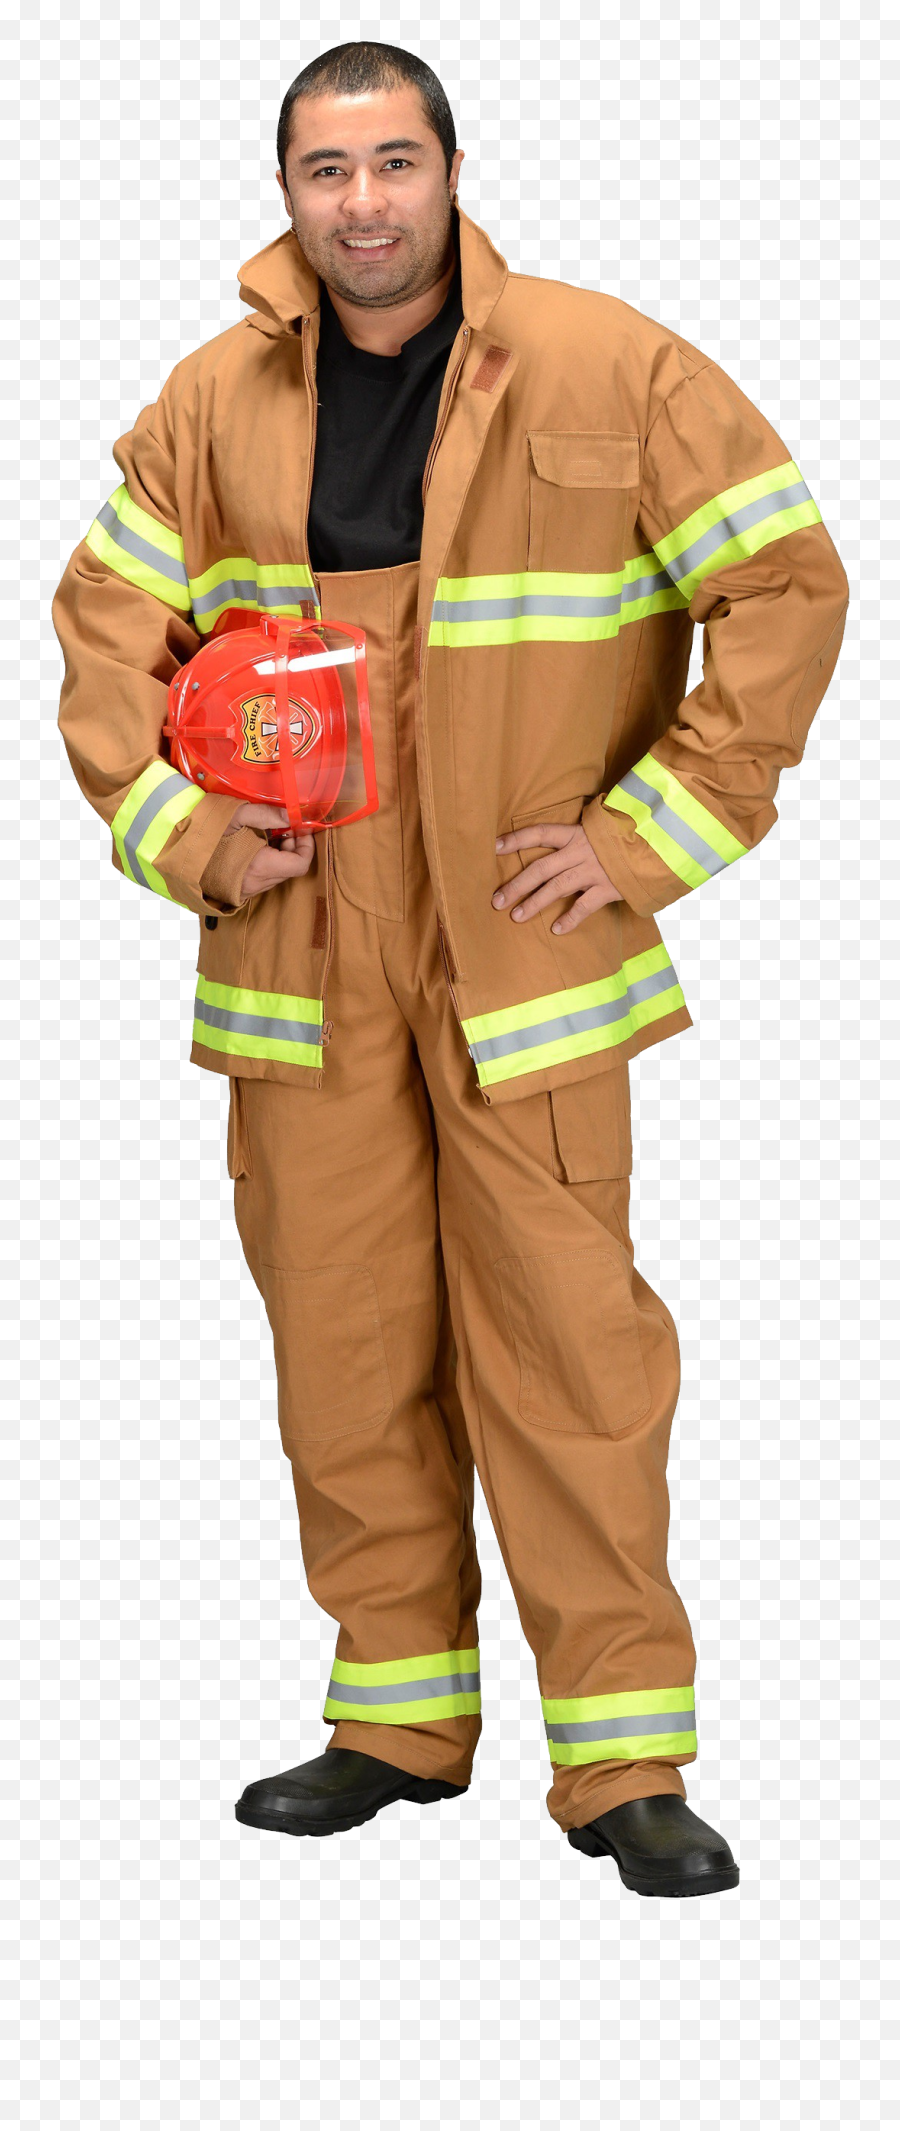 Firefighter Png Picture - Male Firefighter Costume,Firefighter Png